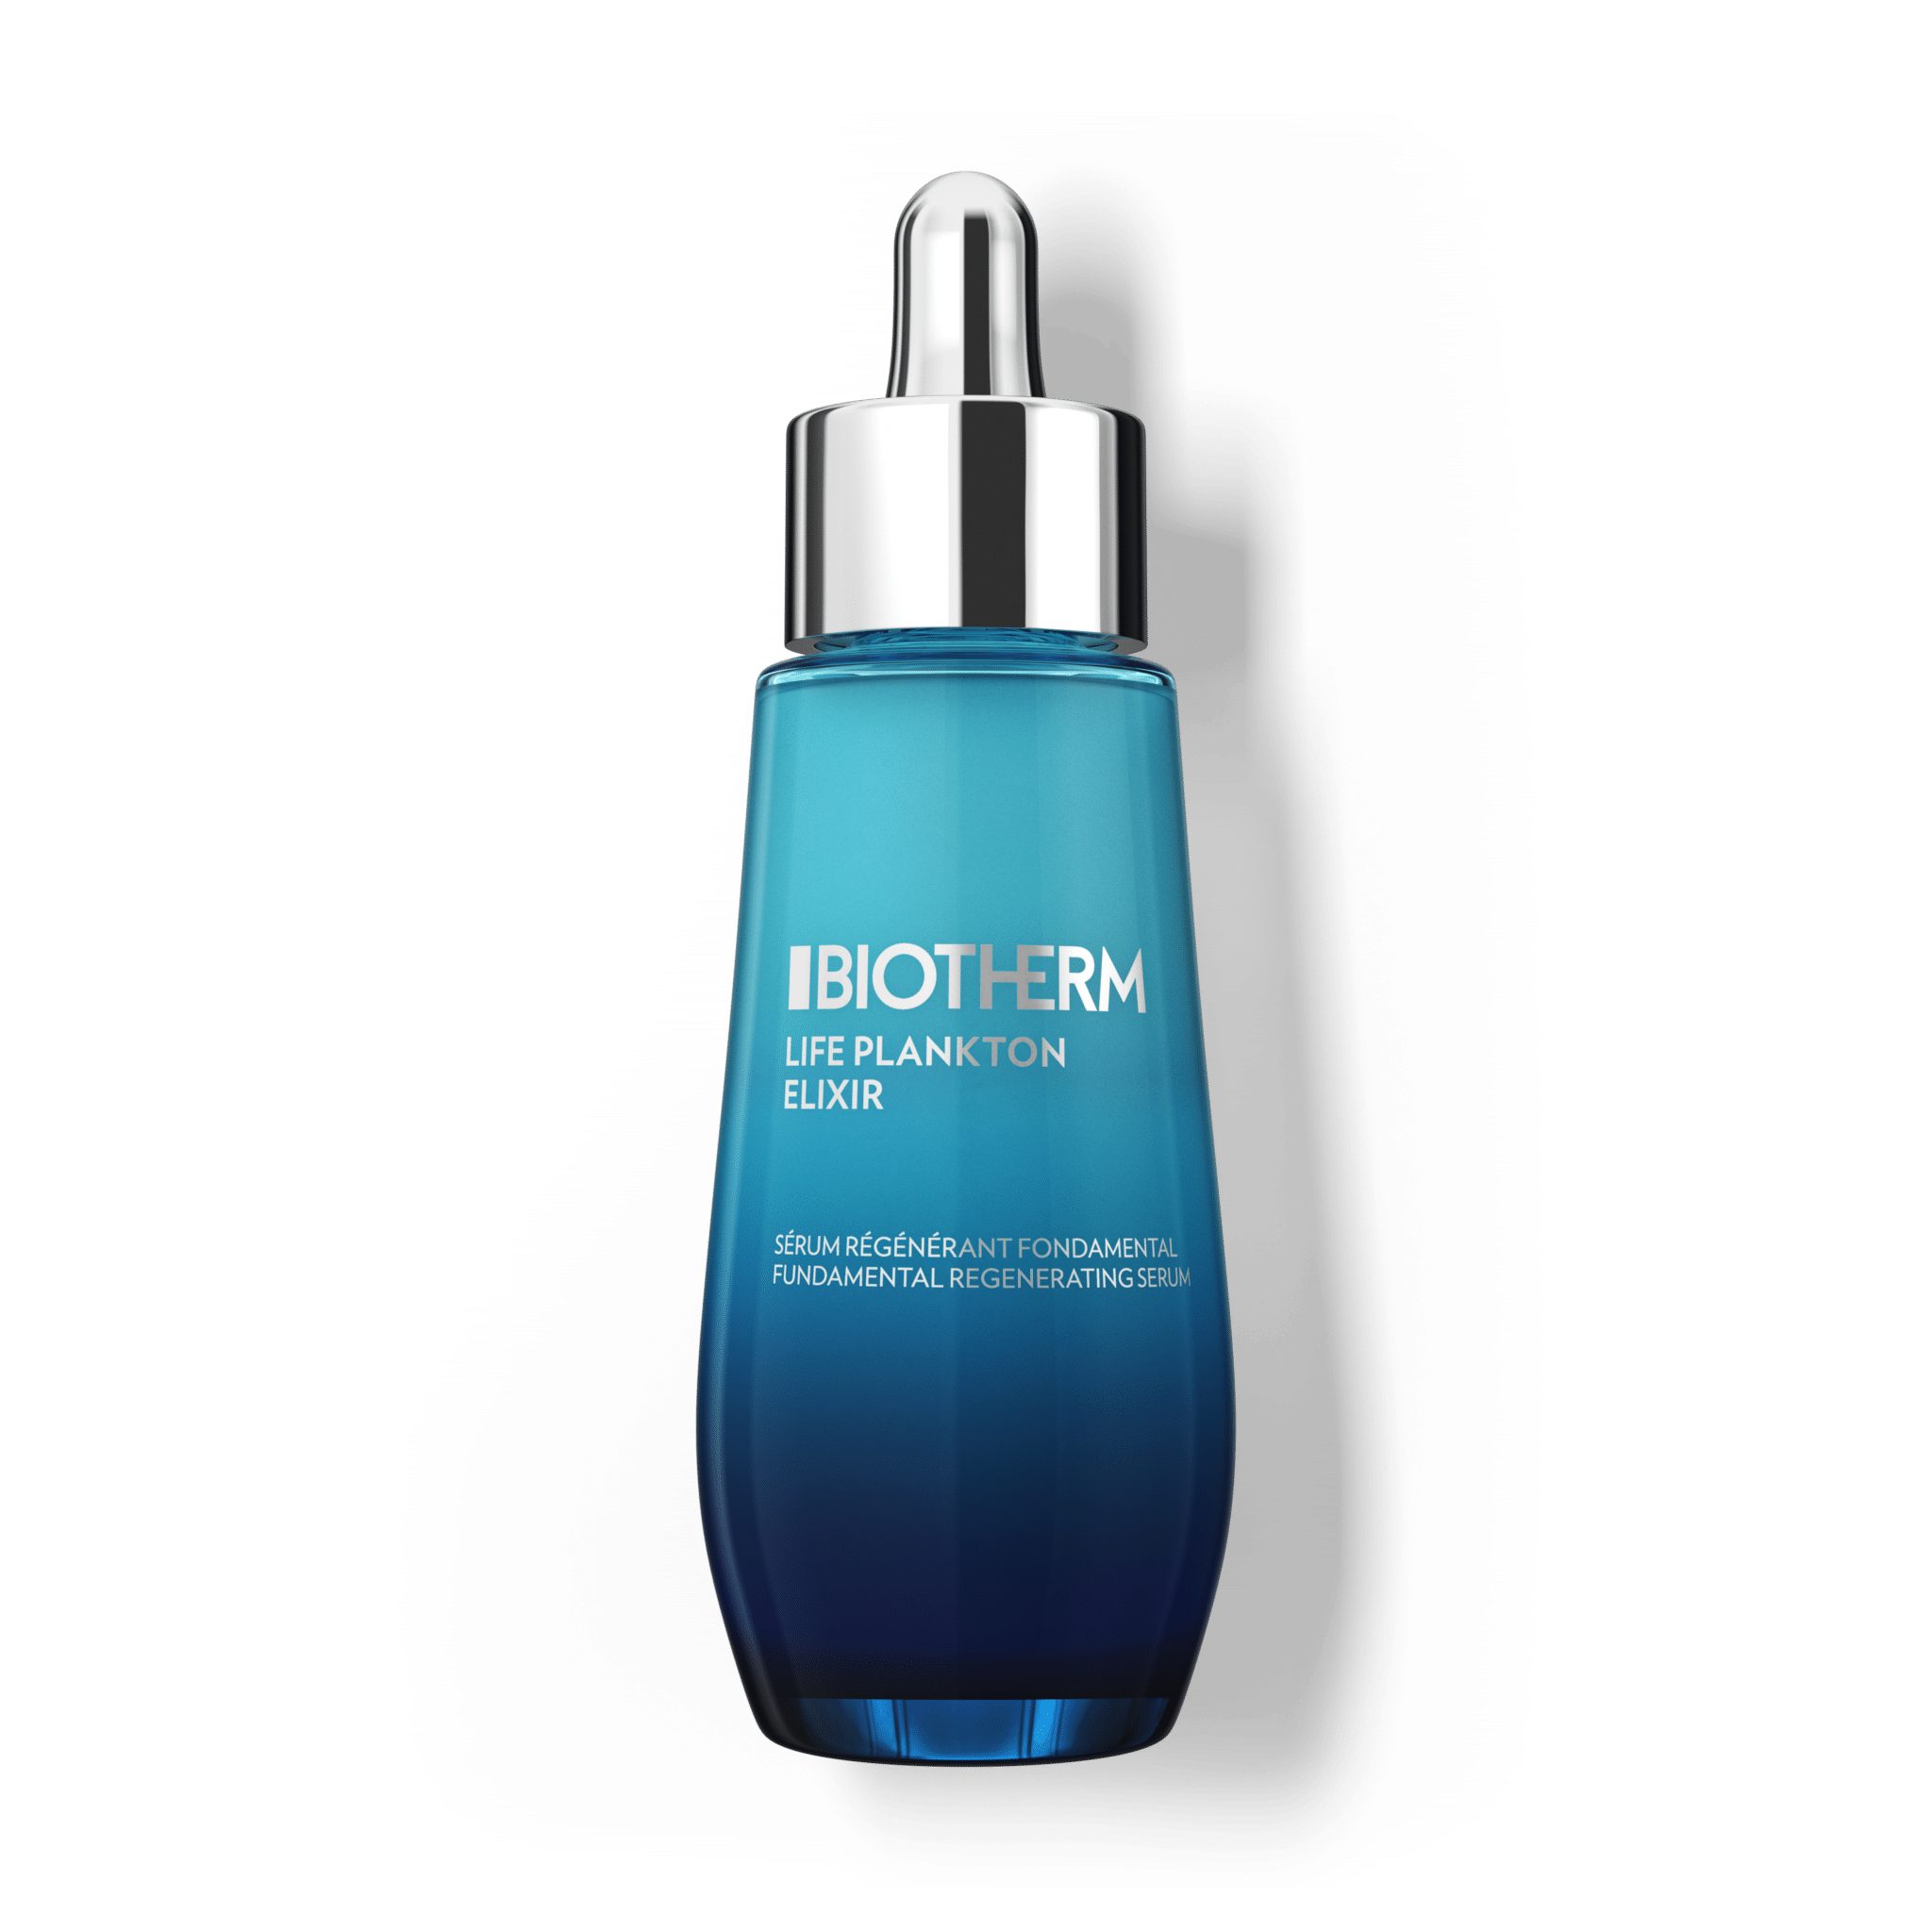 Biotherm lichaamslotions – anti-uitdrooging